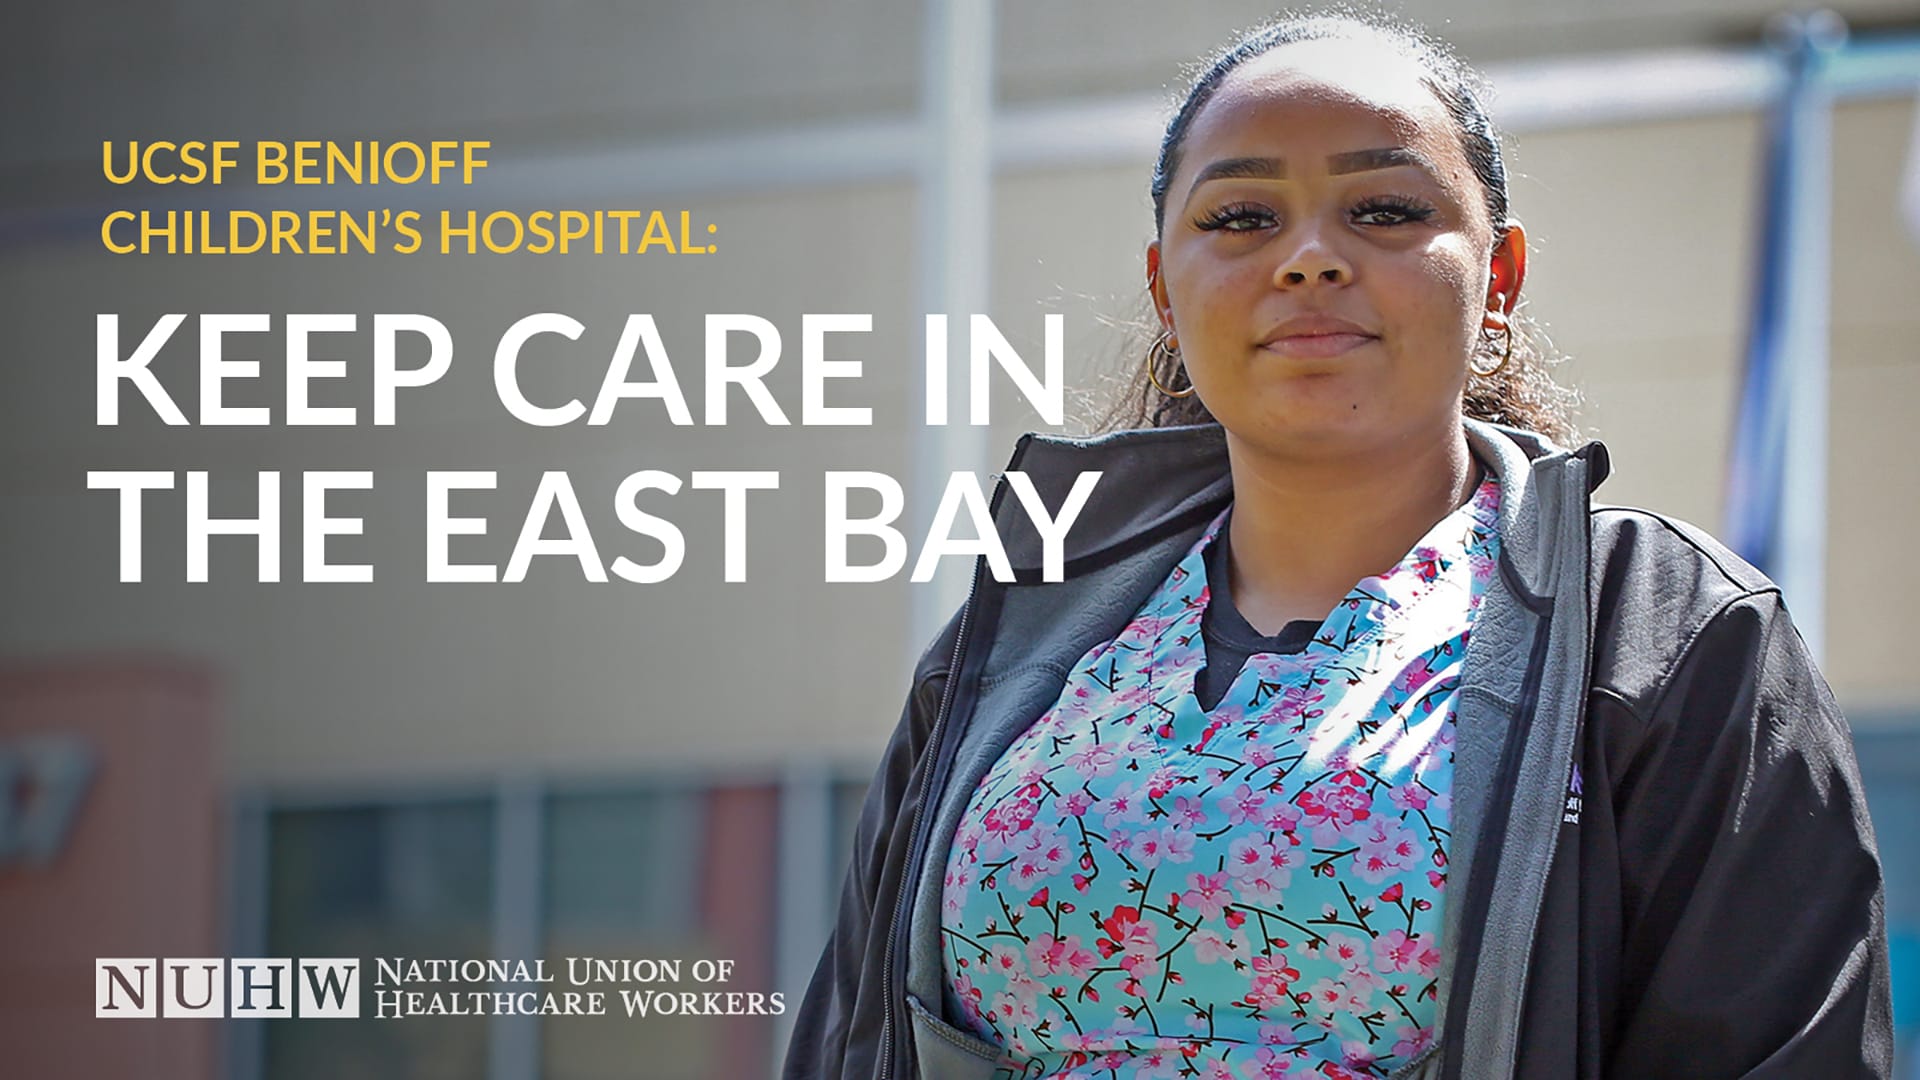 Keep Care in the East Bay